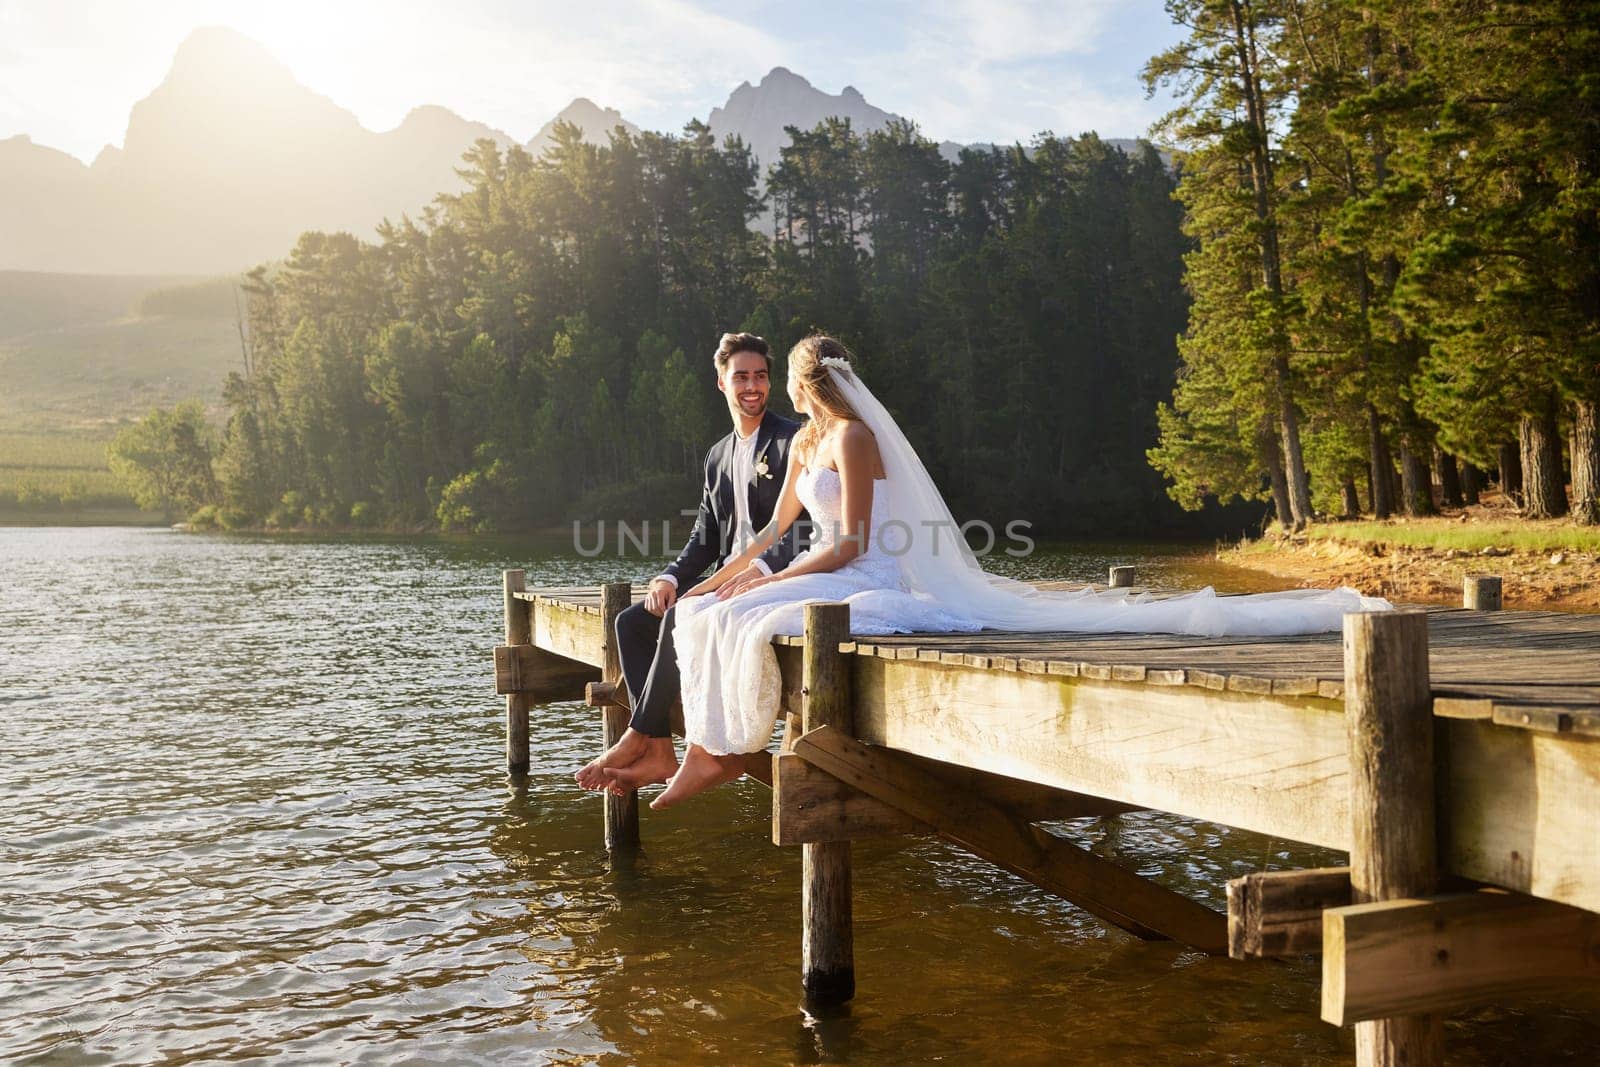 Forest, lake and a married couple on a pier in celebration together after a wedding ceremony of tradition. Marriage, love or romance with a bride and groom sitting outdoor while bonding in nature.